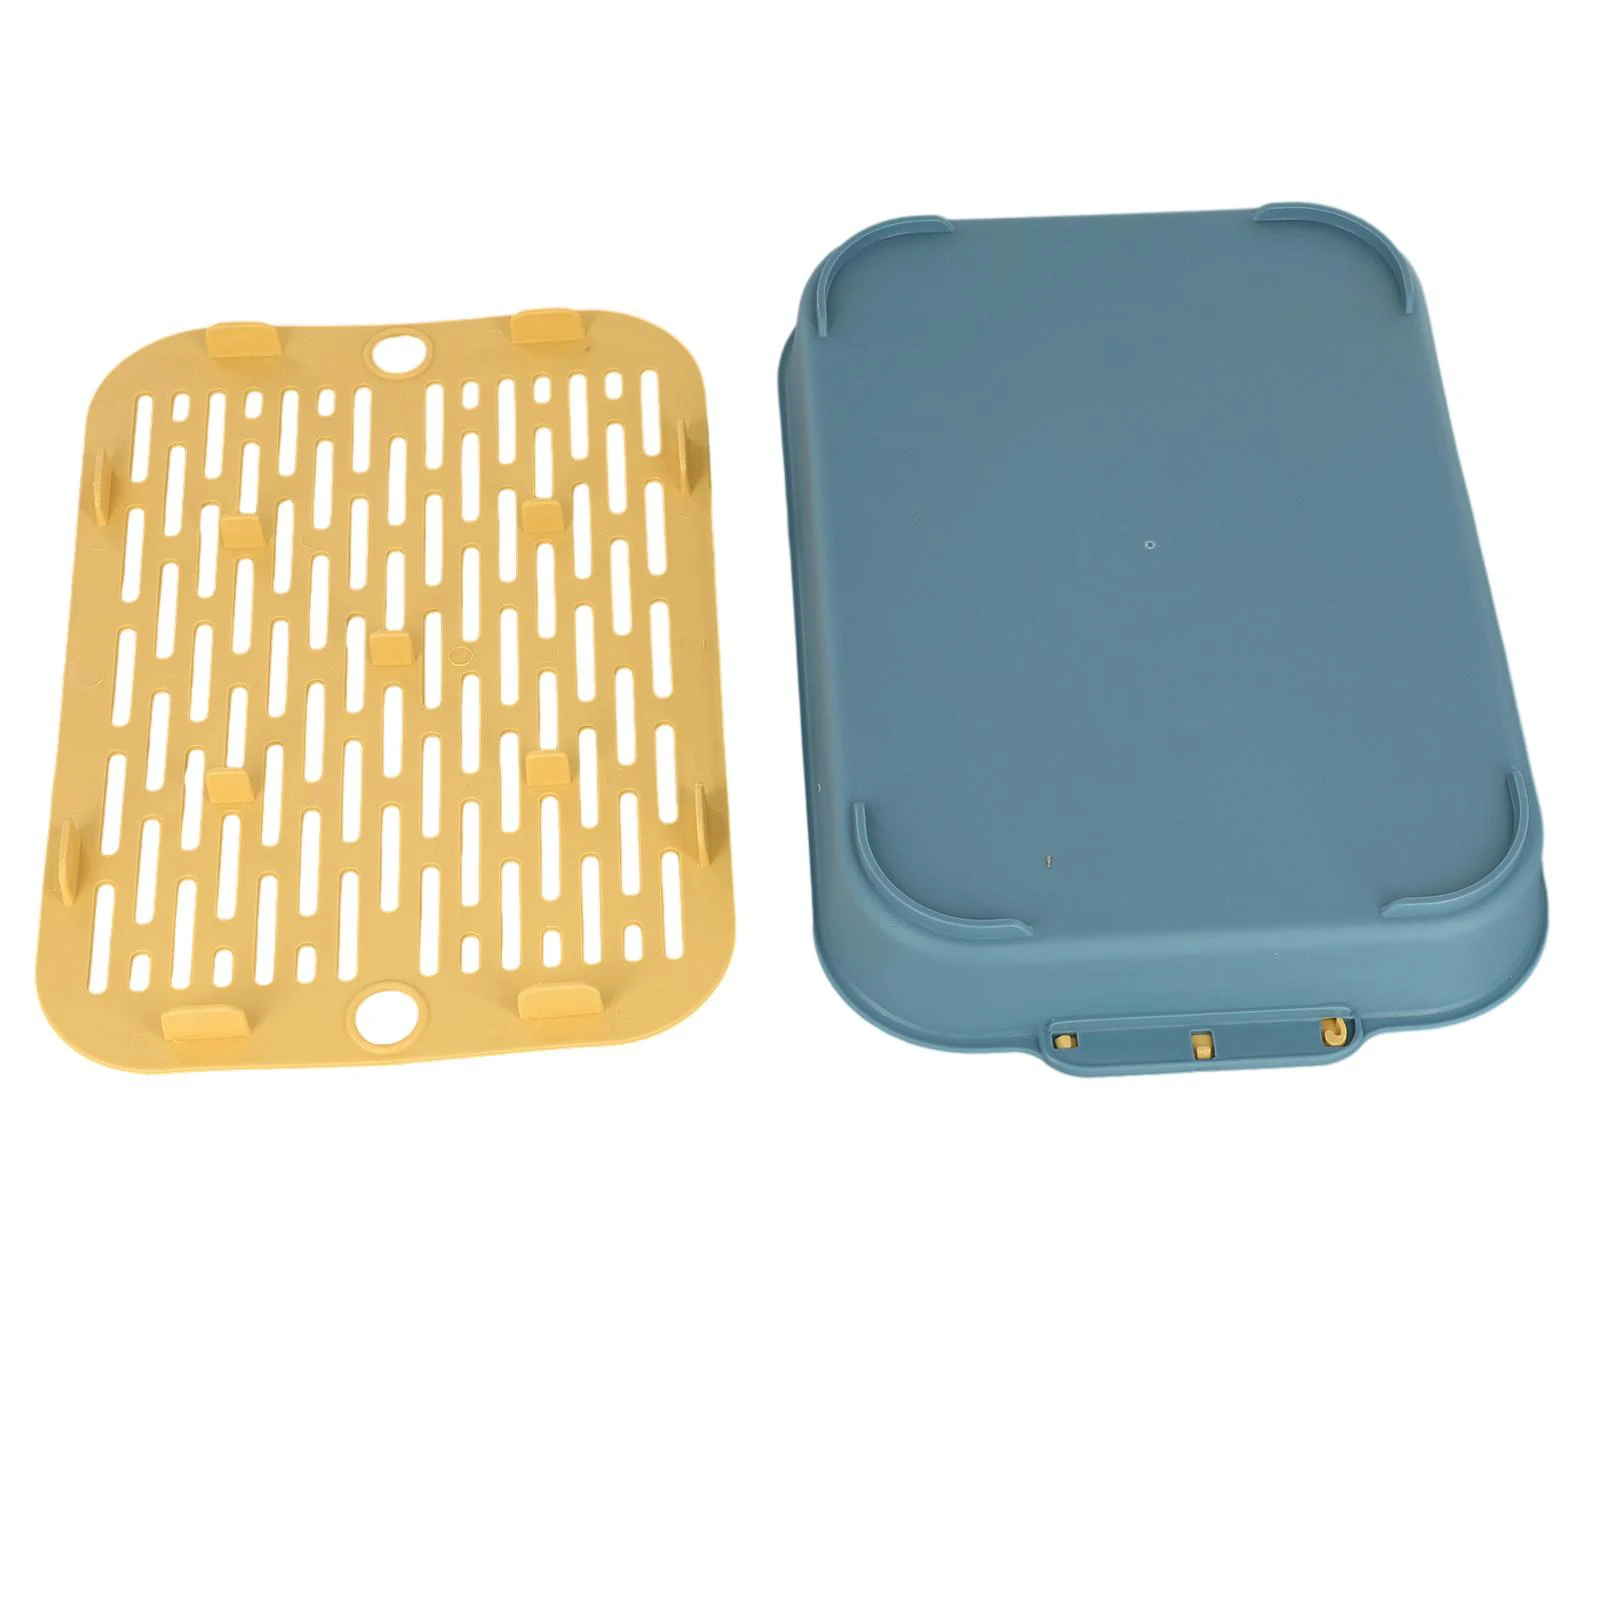 

Tray Rabbit Litter Tray Detachable Design Heightened Grid Design Large Space Smooth Corner Durable New Practical